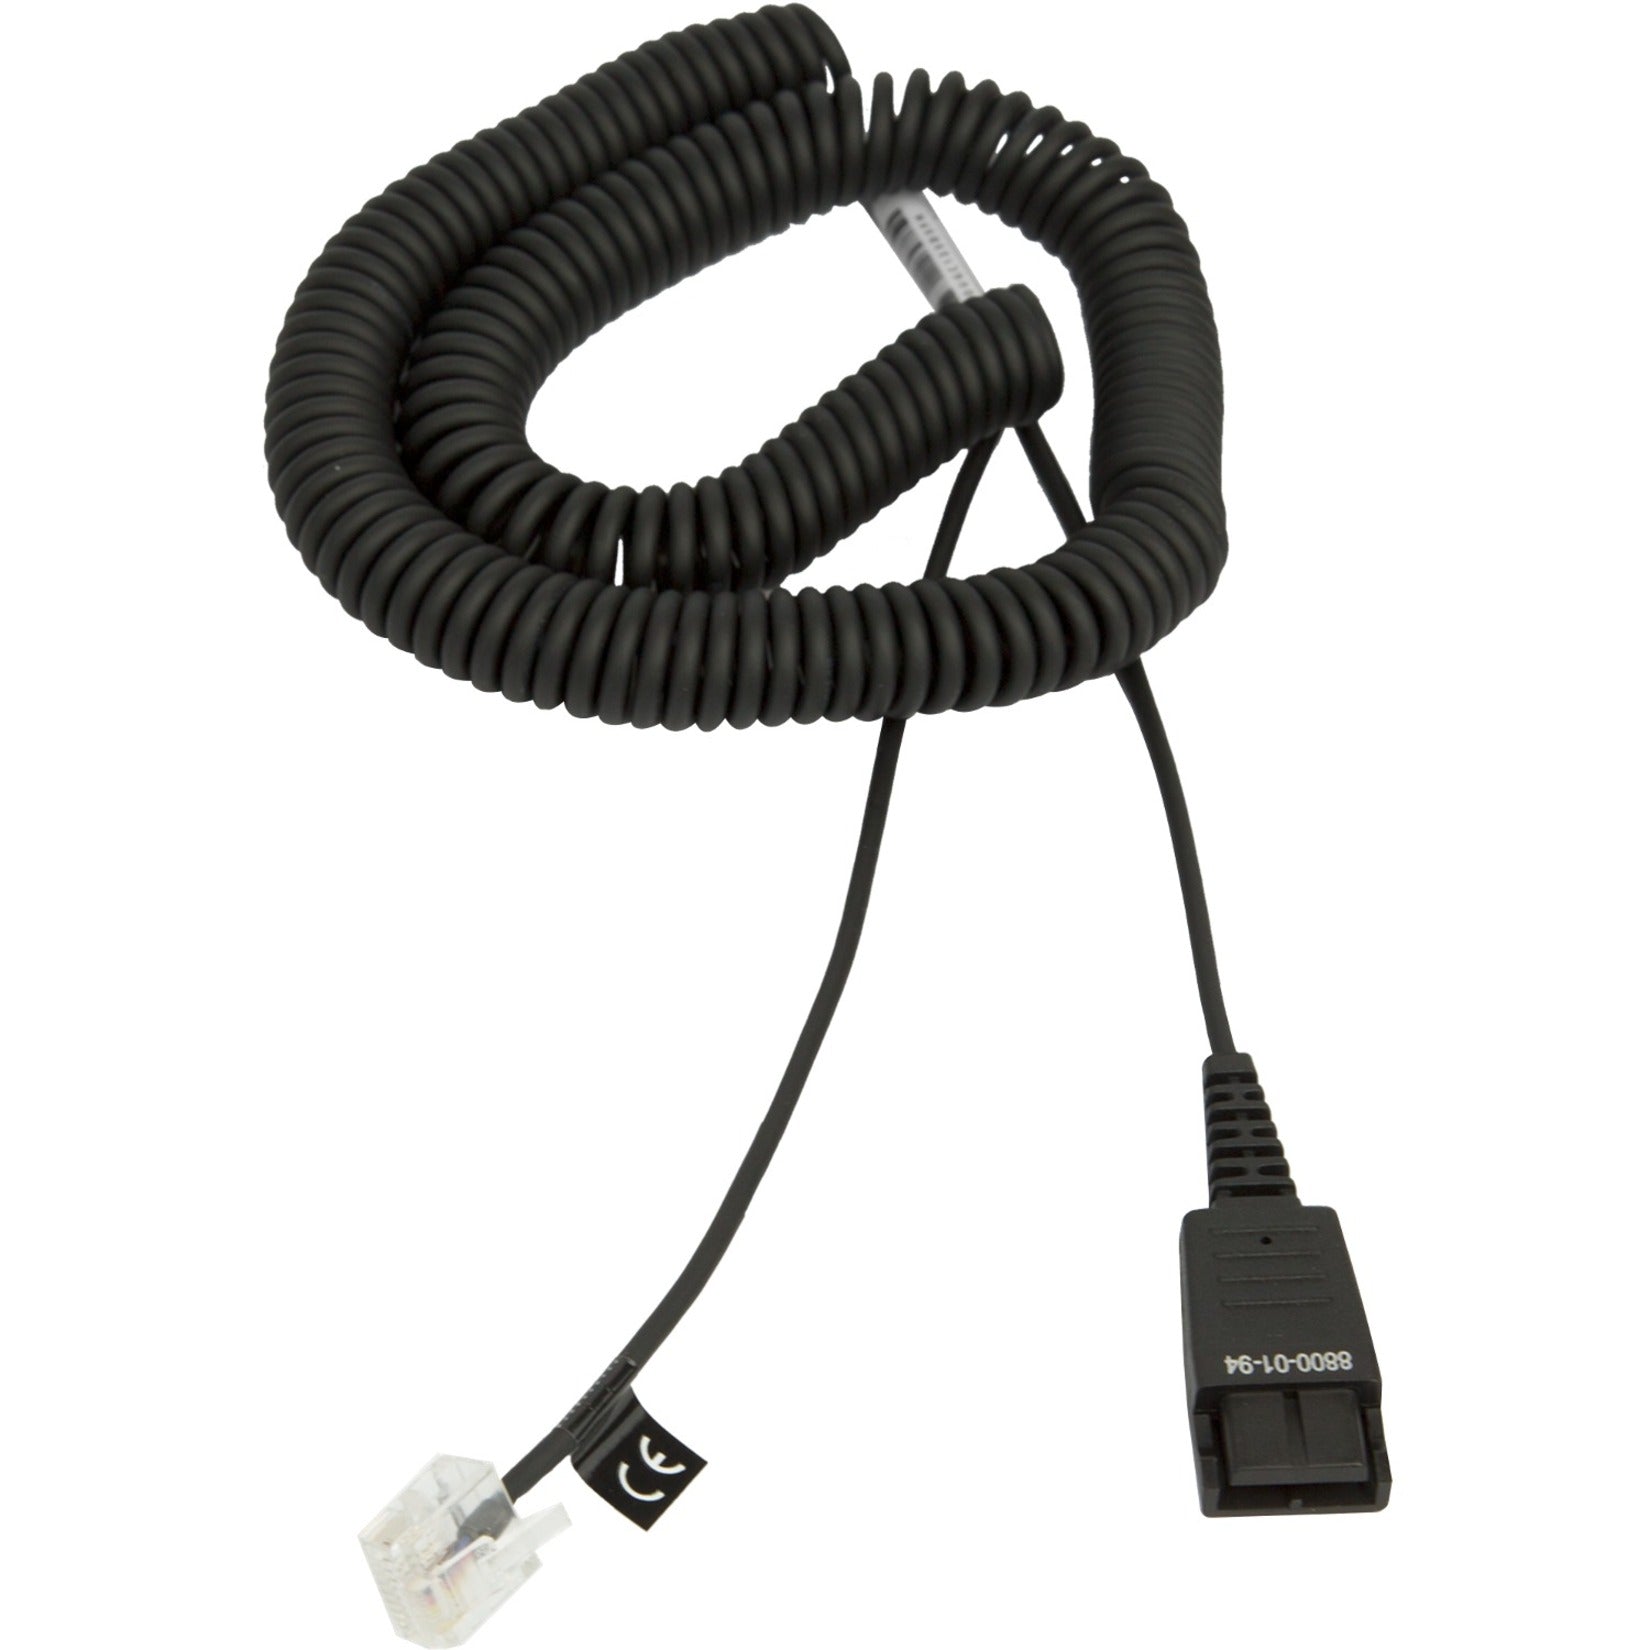 Jabra 8800-01-94 Headset Audio Cable Adapter, Coiled, 6.60 ft Cable Length